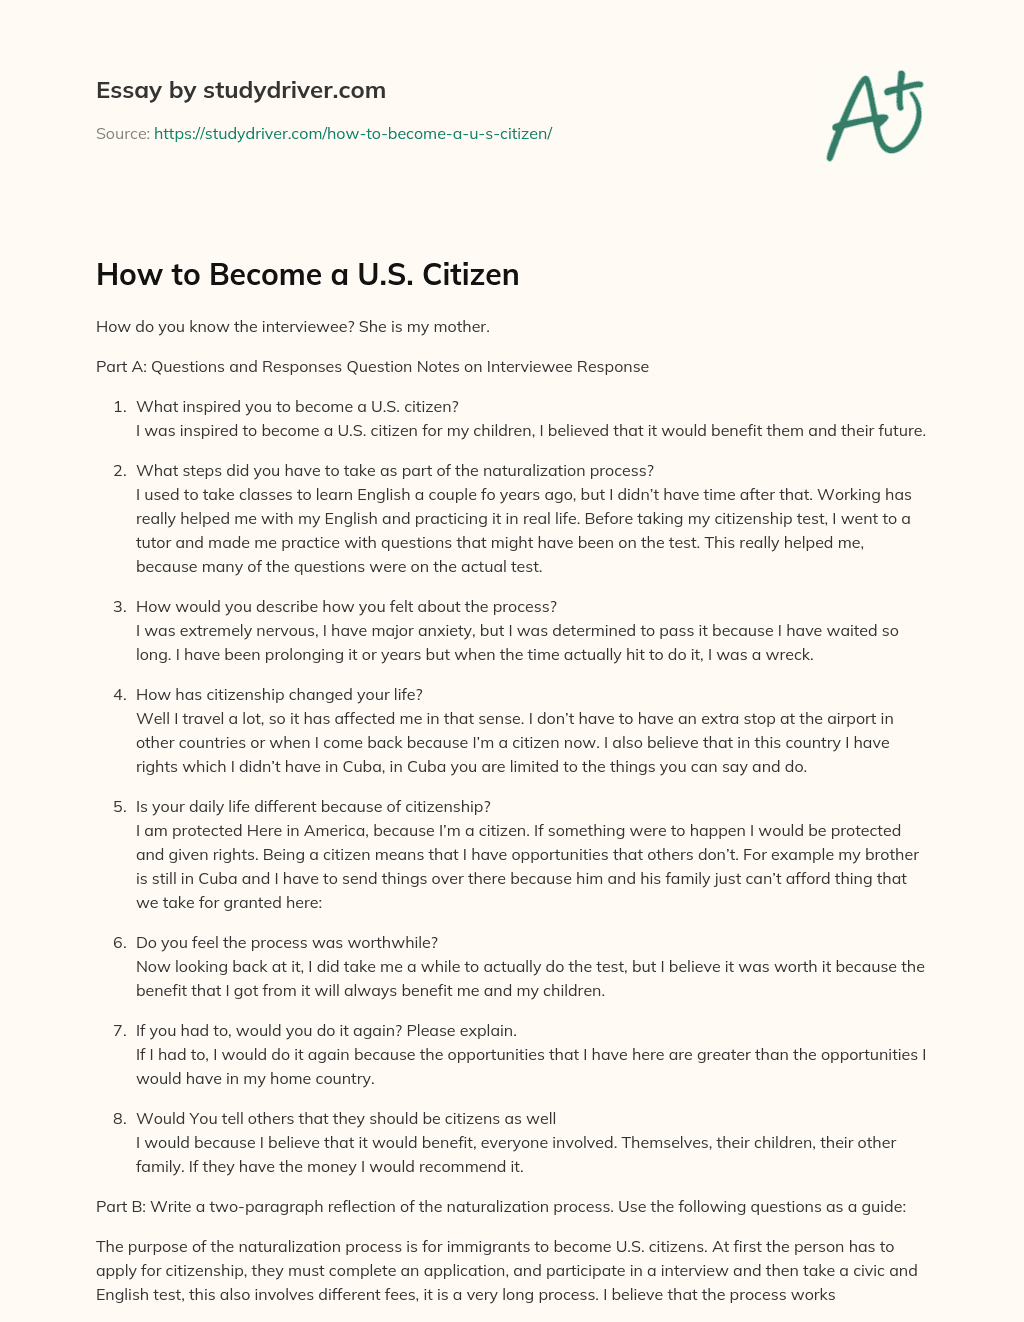 How to Become a U.S. Citizen essay